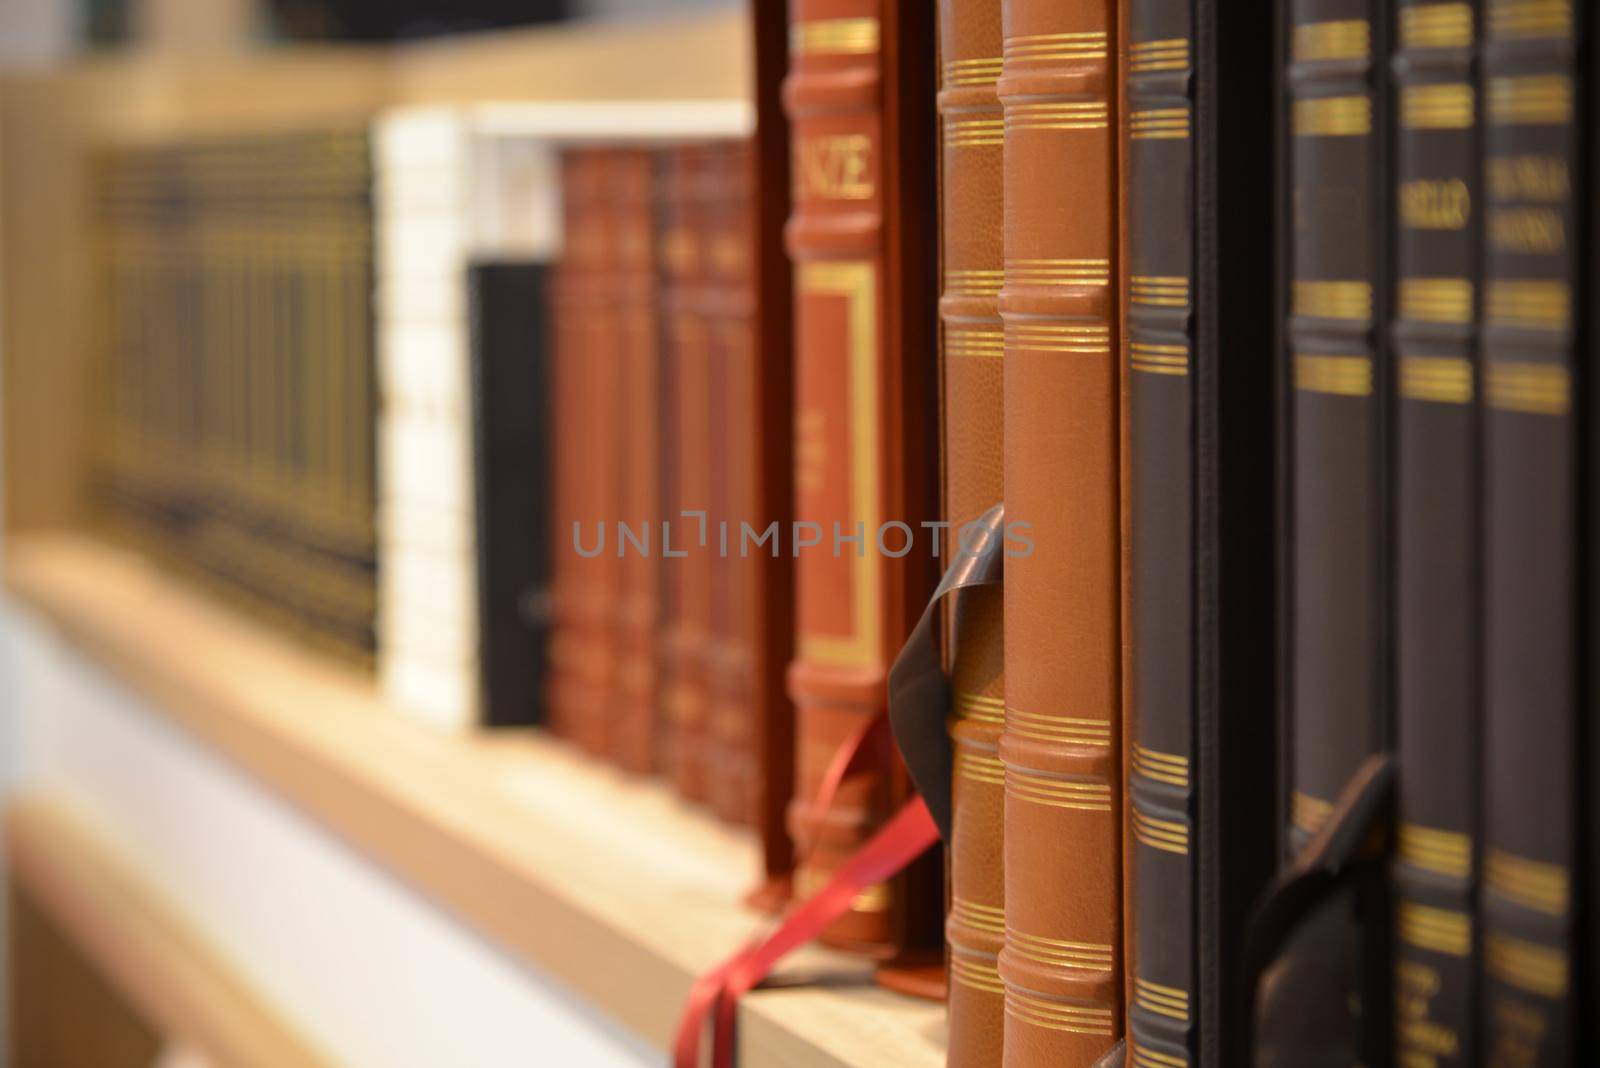 Bookshelf in perspective view with row of classical leather hardcover books by lemar